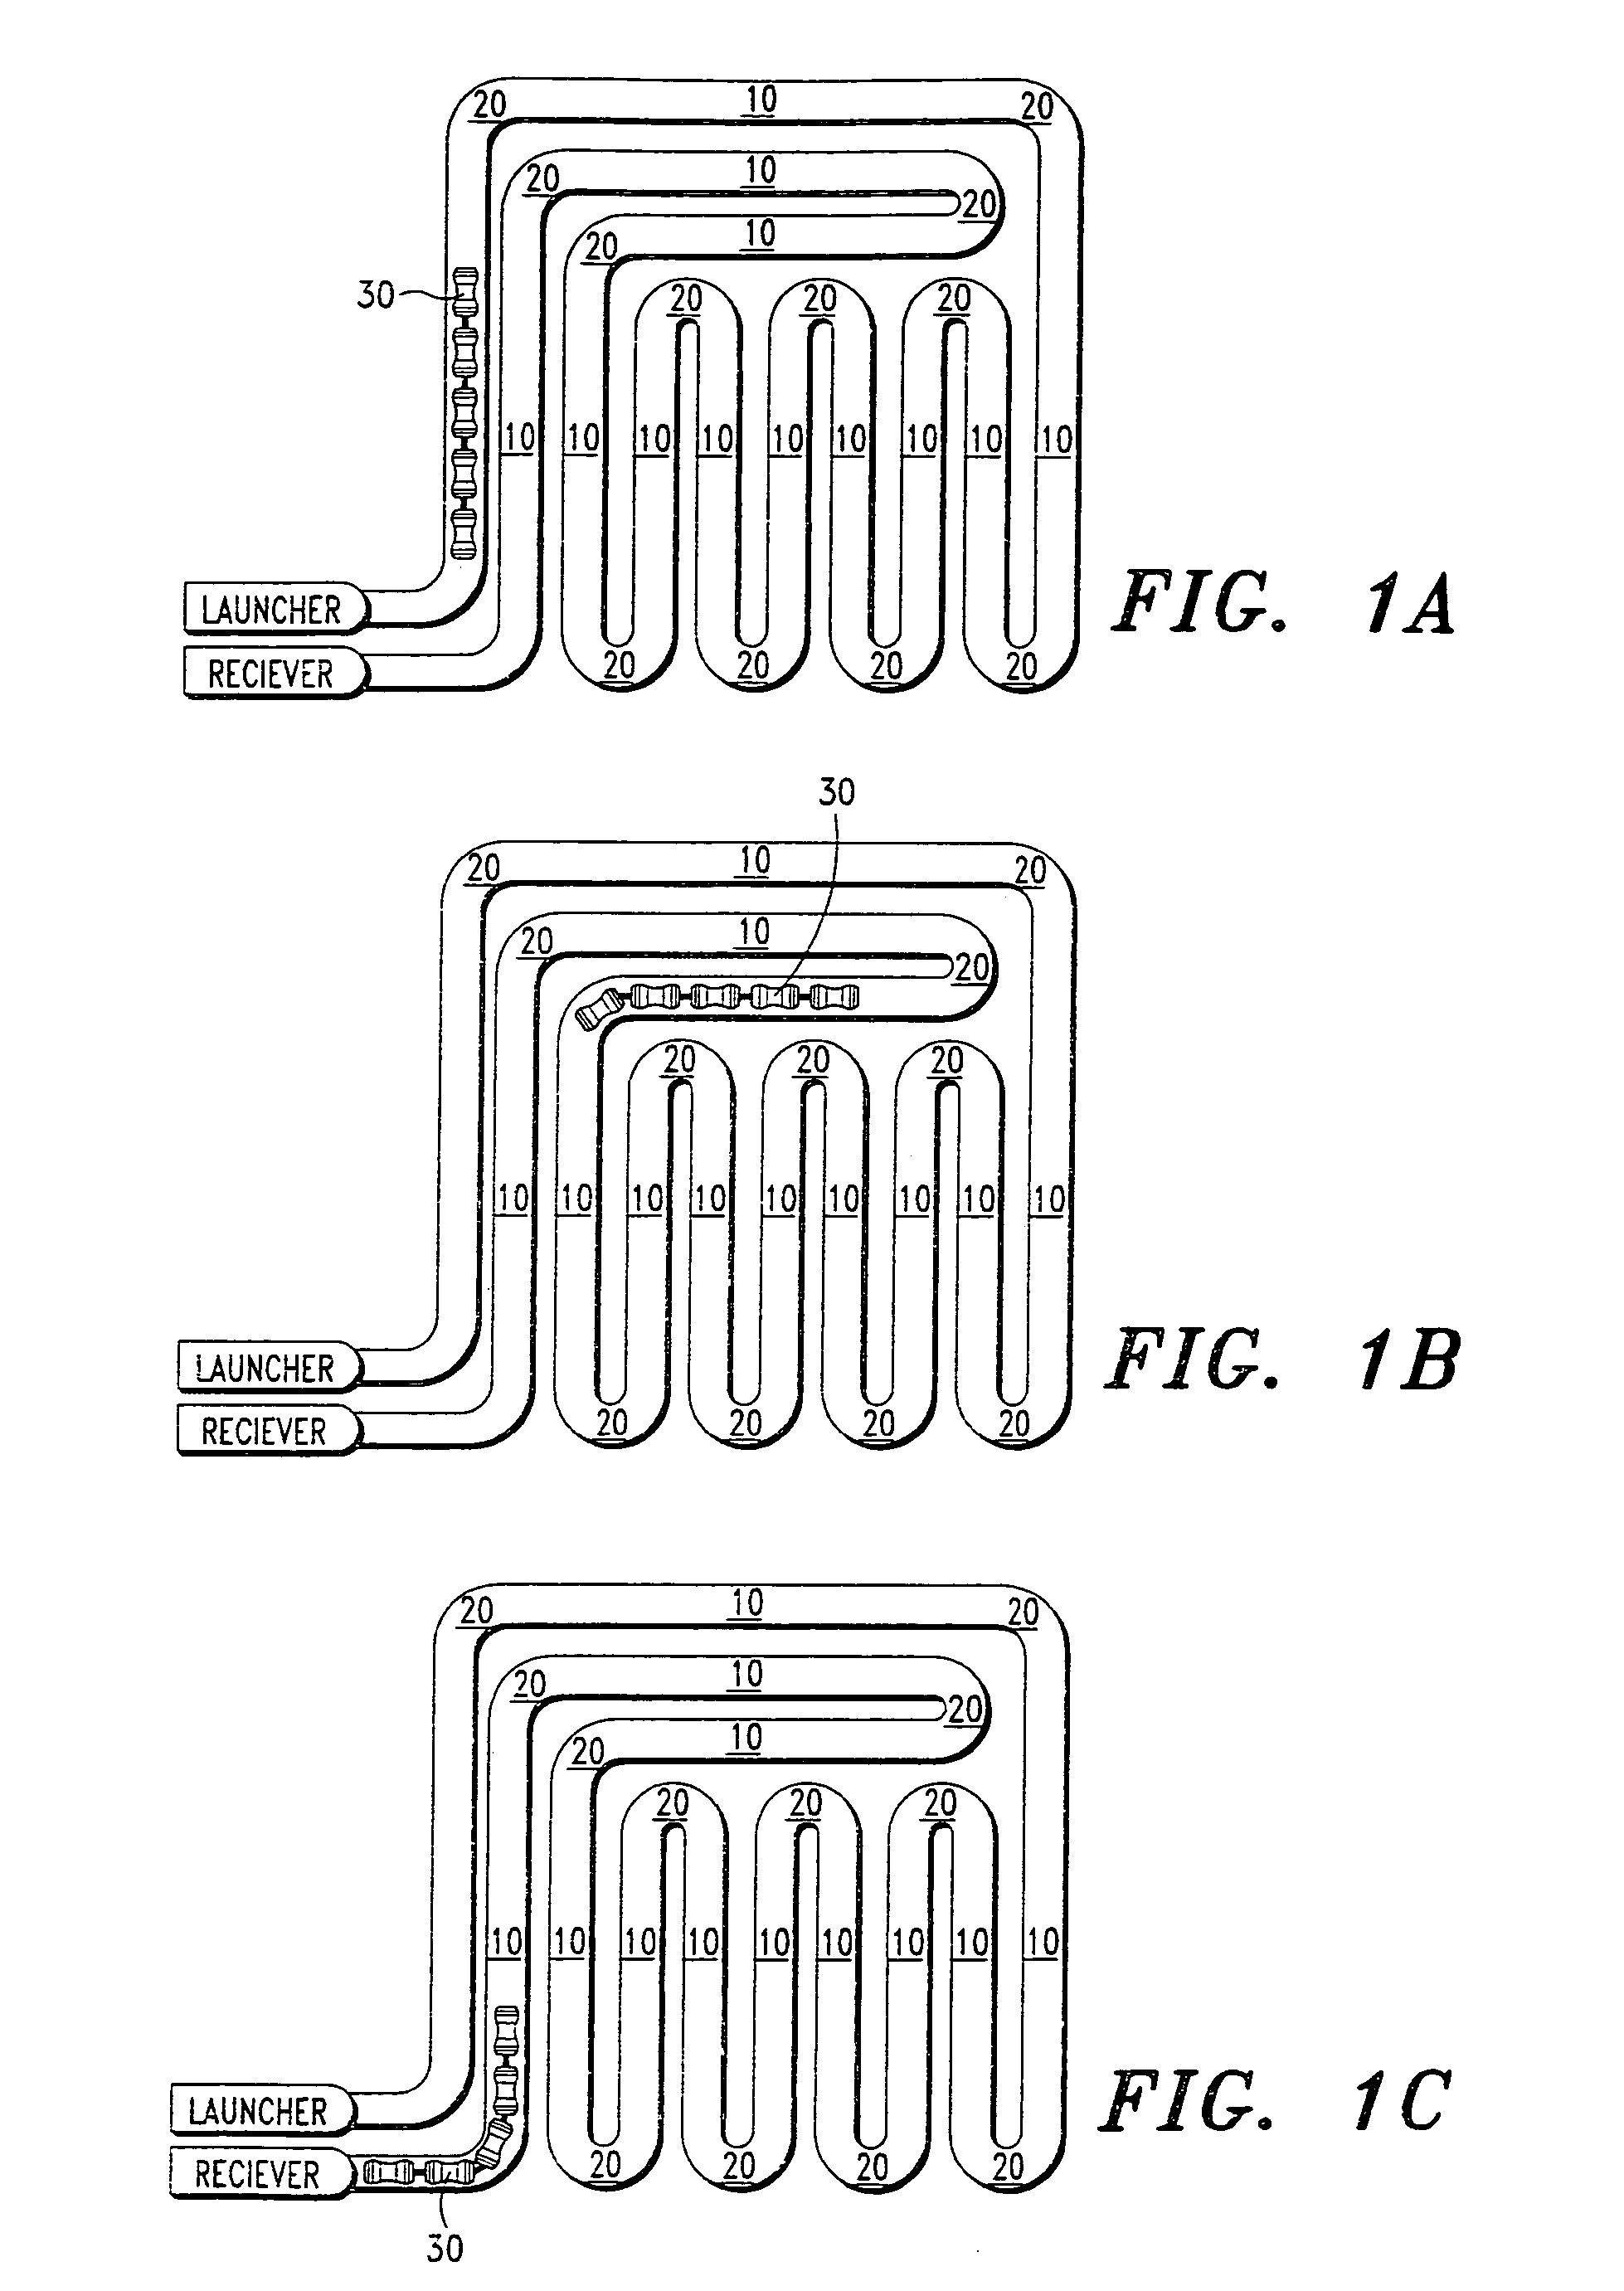 2D and 3D display system and method for furnace tube inspection